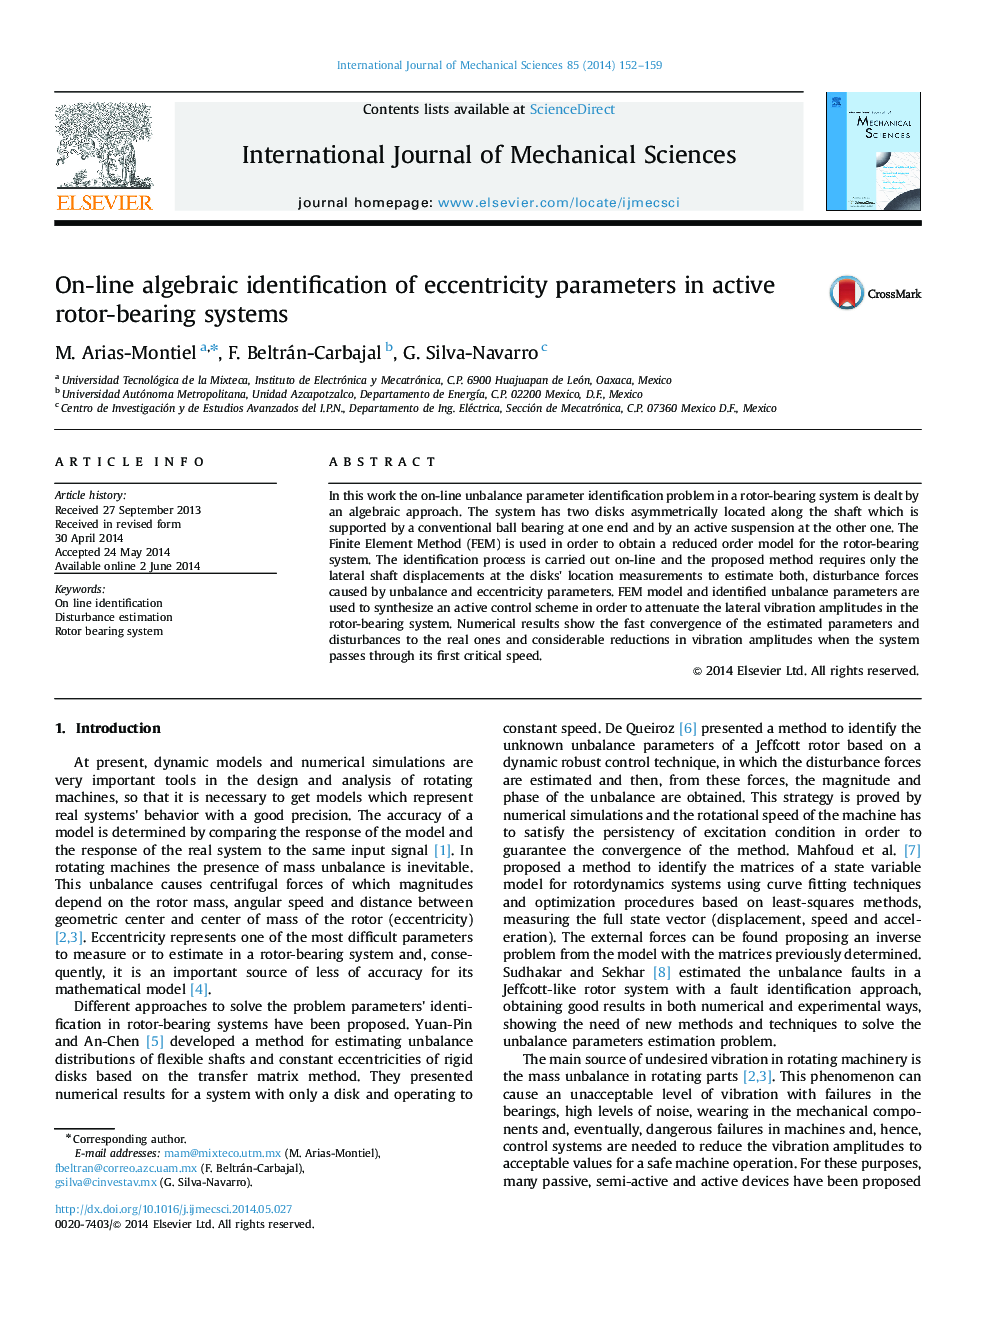 On-line algebraic identification of eccentricity parameters in active rotor-bearing systems